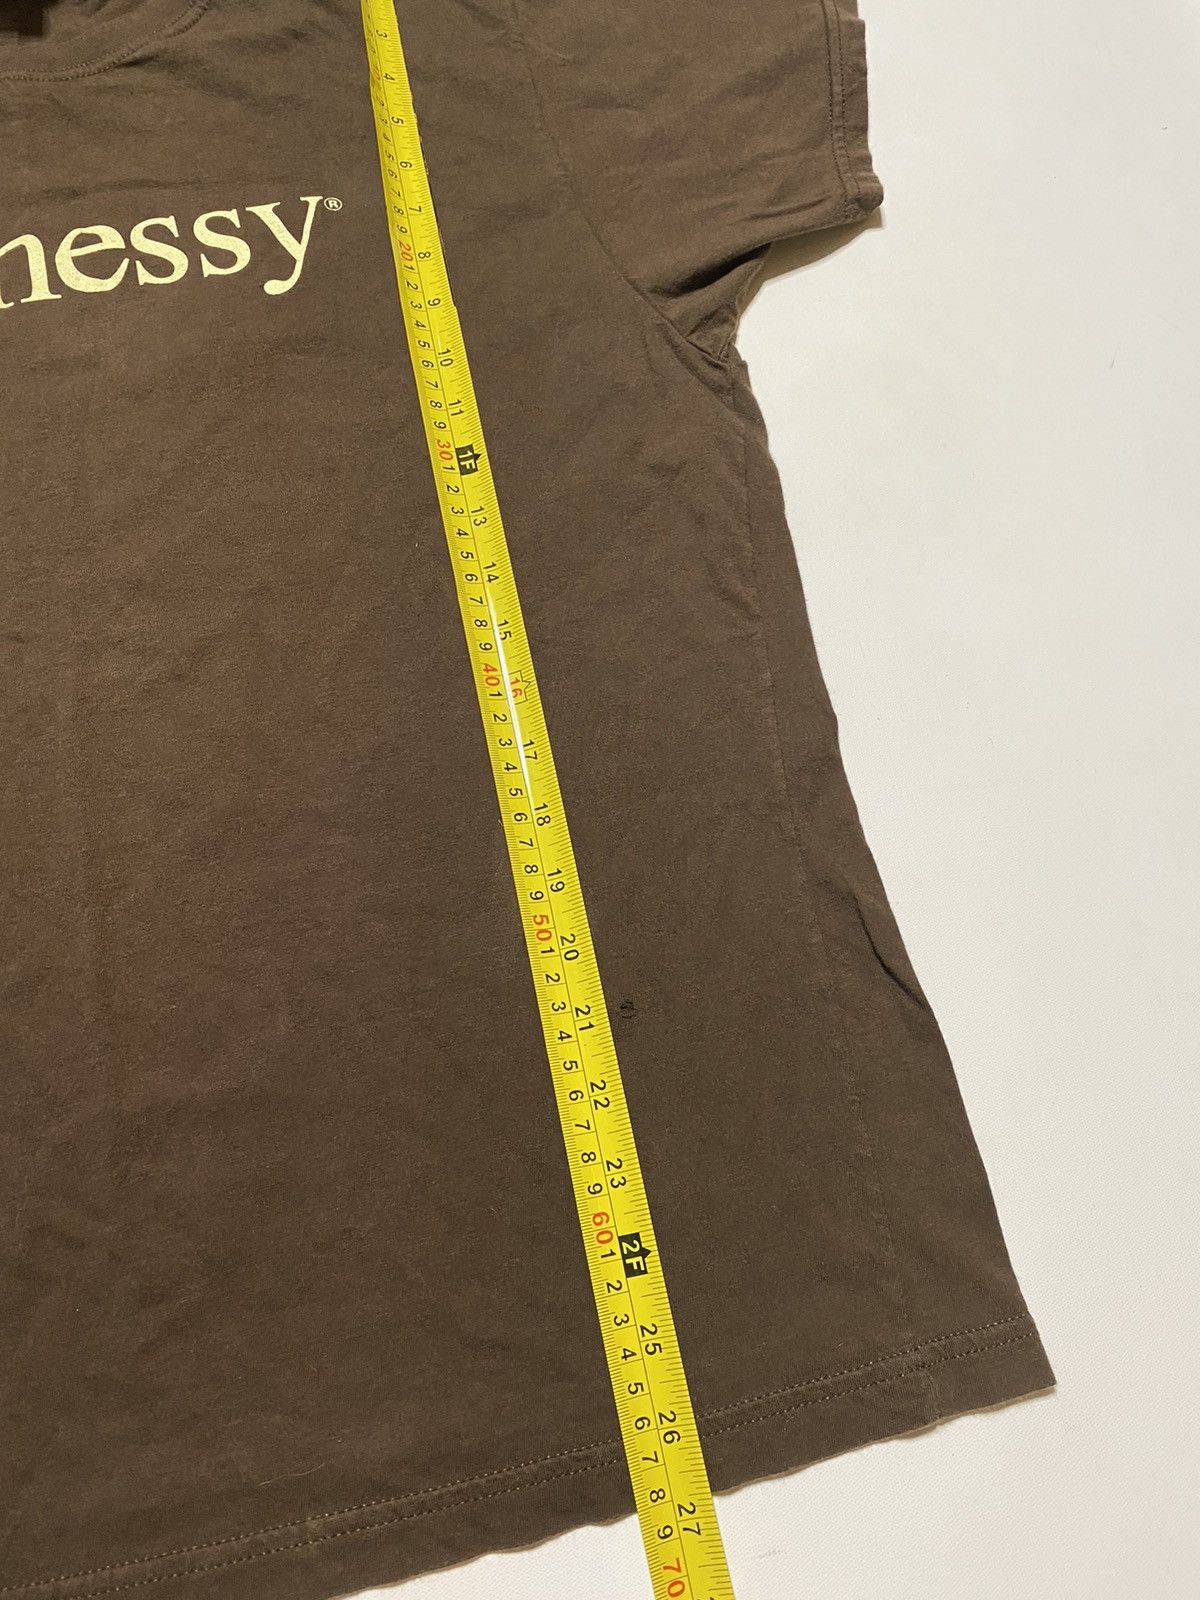 Hennessy Vintage Hennessy Cognac T Shirt Size XL Made IN USA Size US XL / EU 56 / 4 - 9 Thumbnail